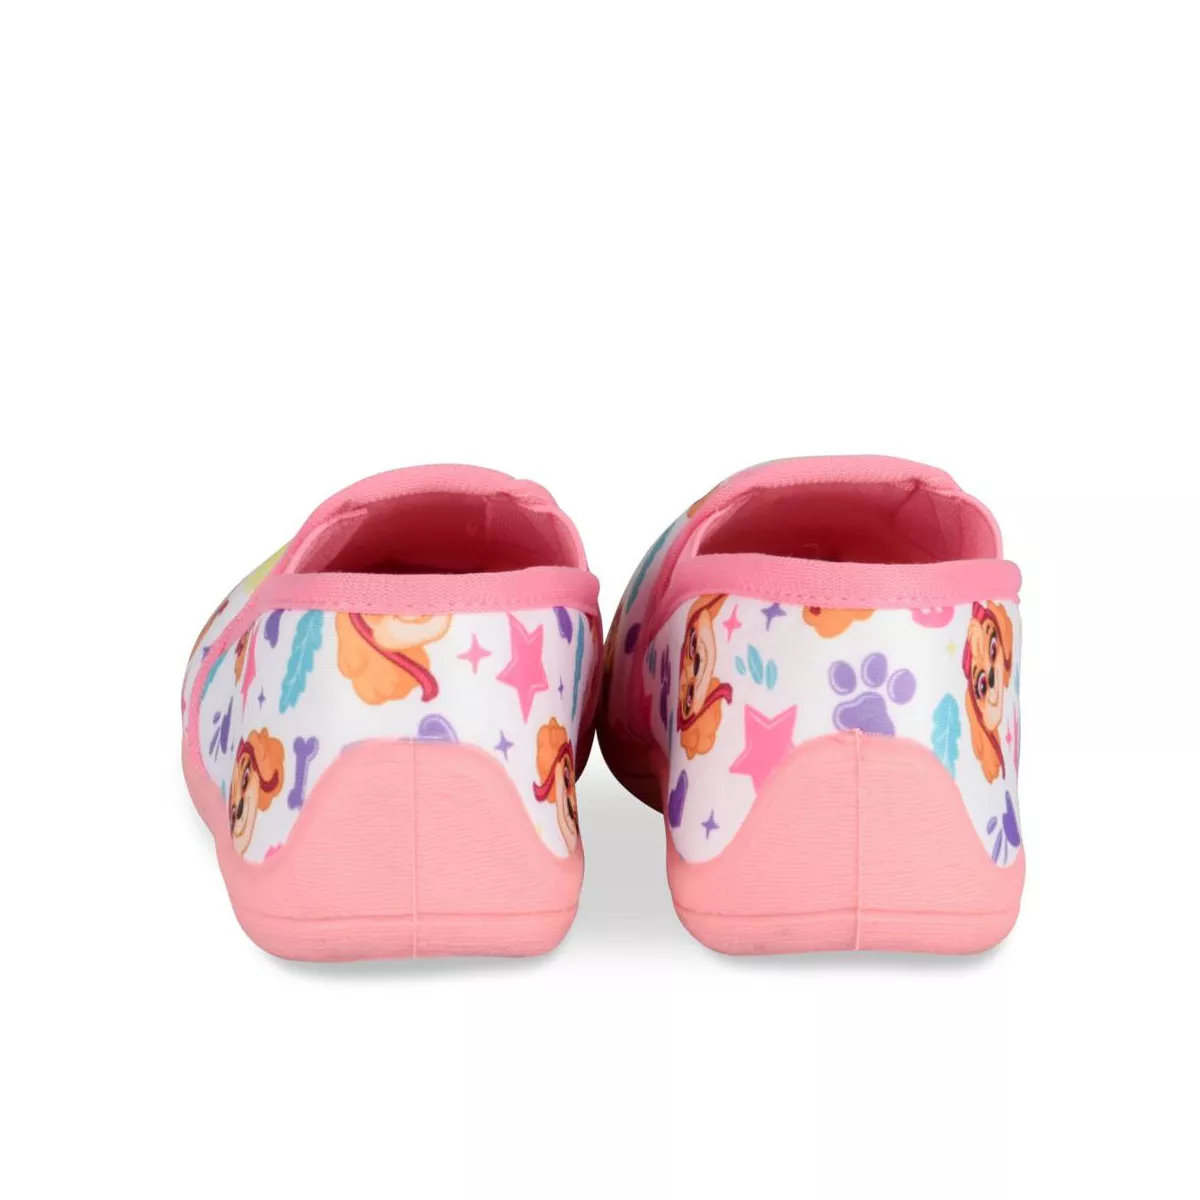 Chaussons ROSE PAW PATROL FILLE